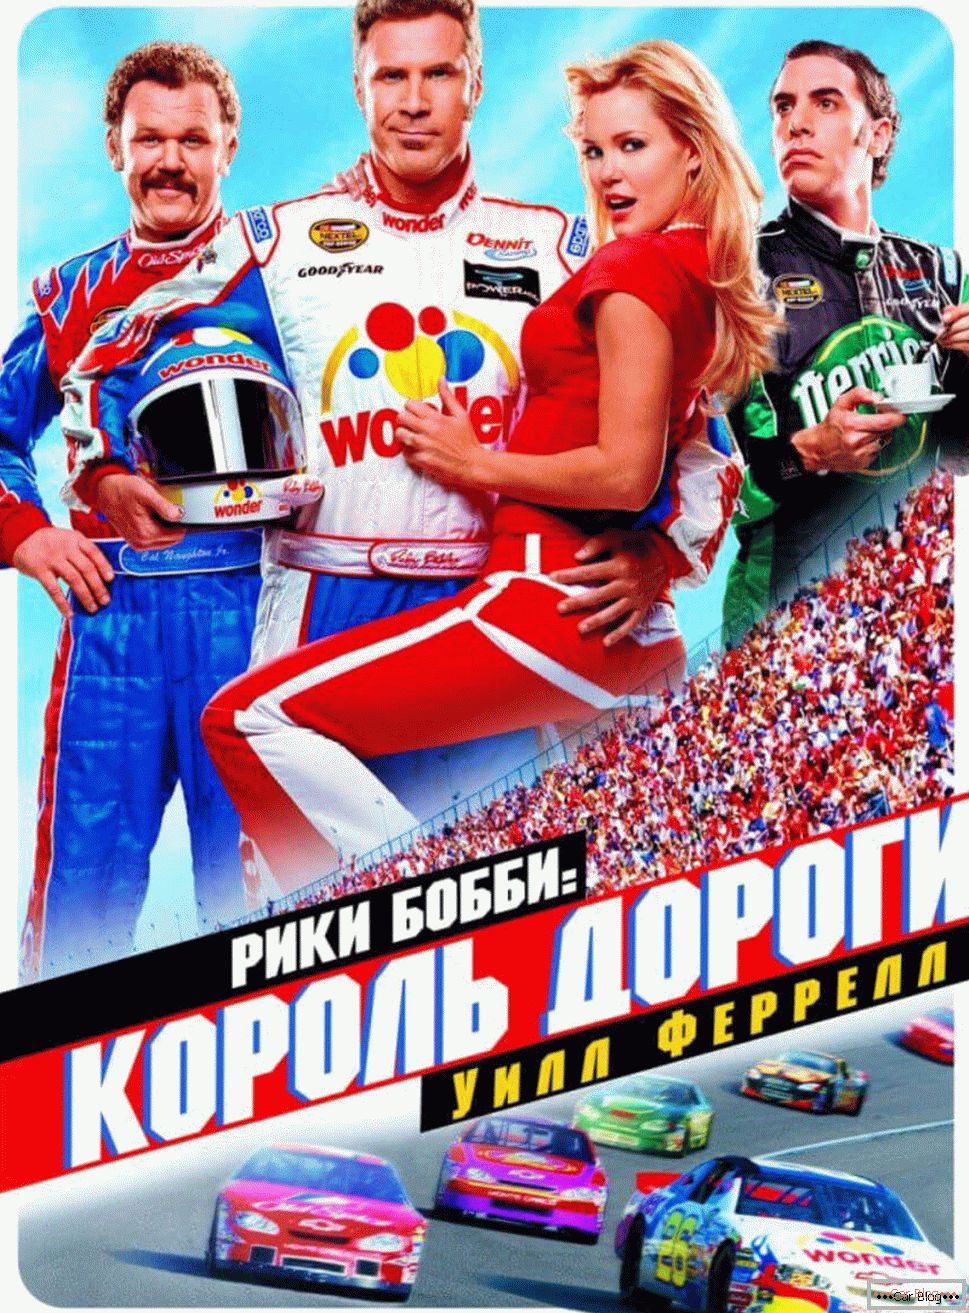 Ricky Bobby Movie Poster - King of the Road